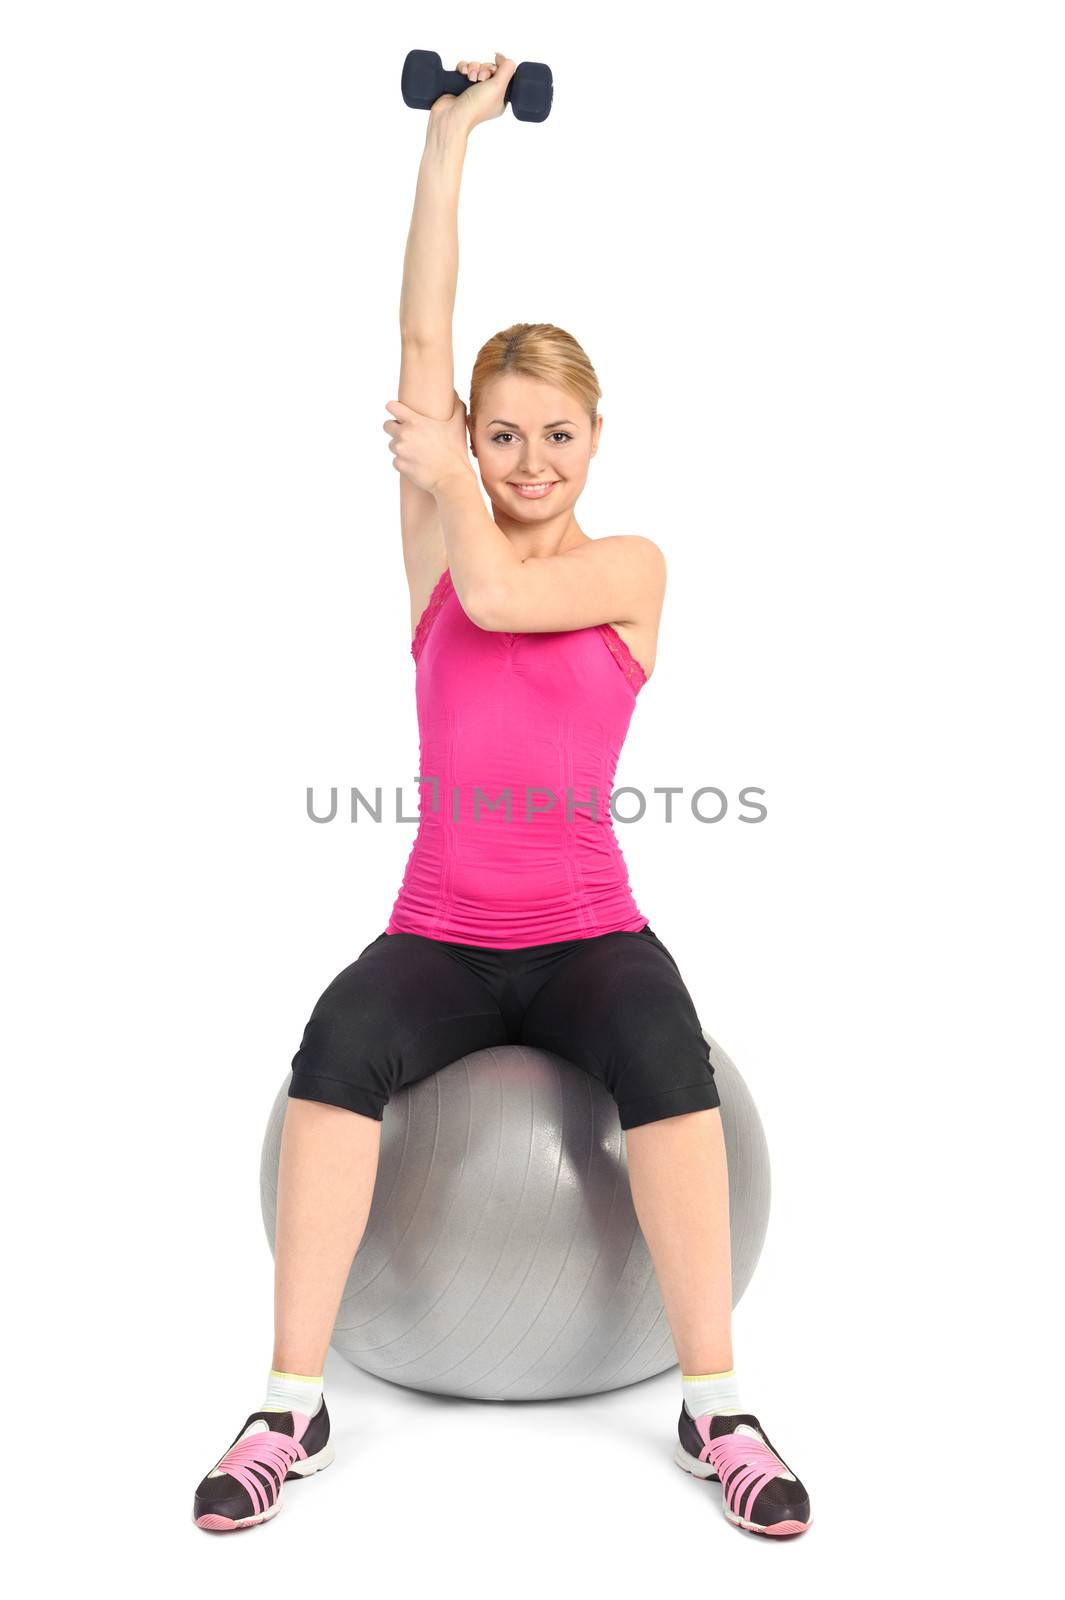 Seated Dumbbell One Arm Triceps Extensions on Fitnes Ball, phase by starush